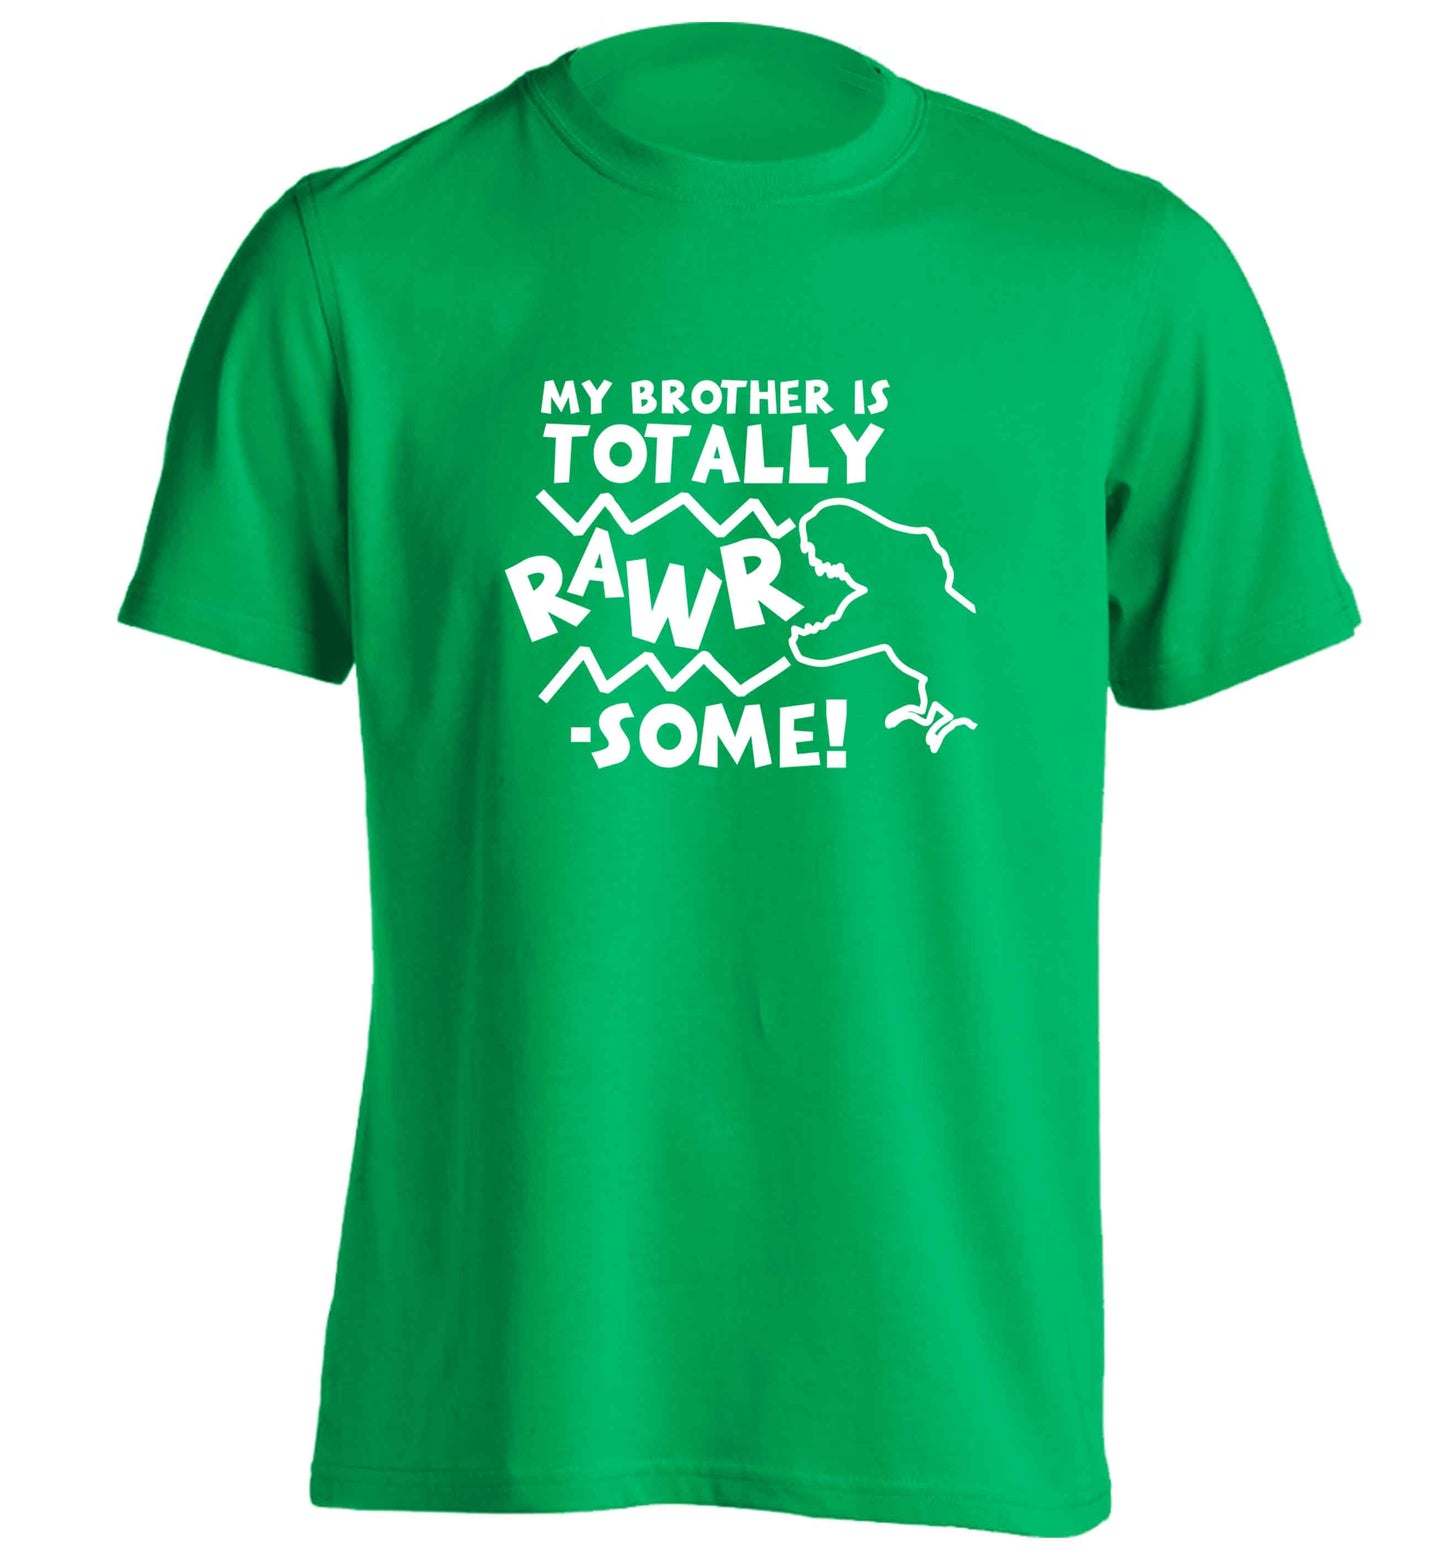 My brother is totally rawrsome adults unisex green Tshirt small